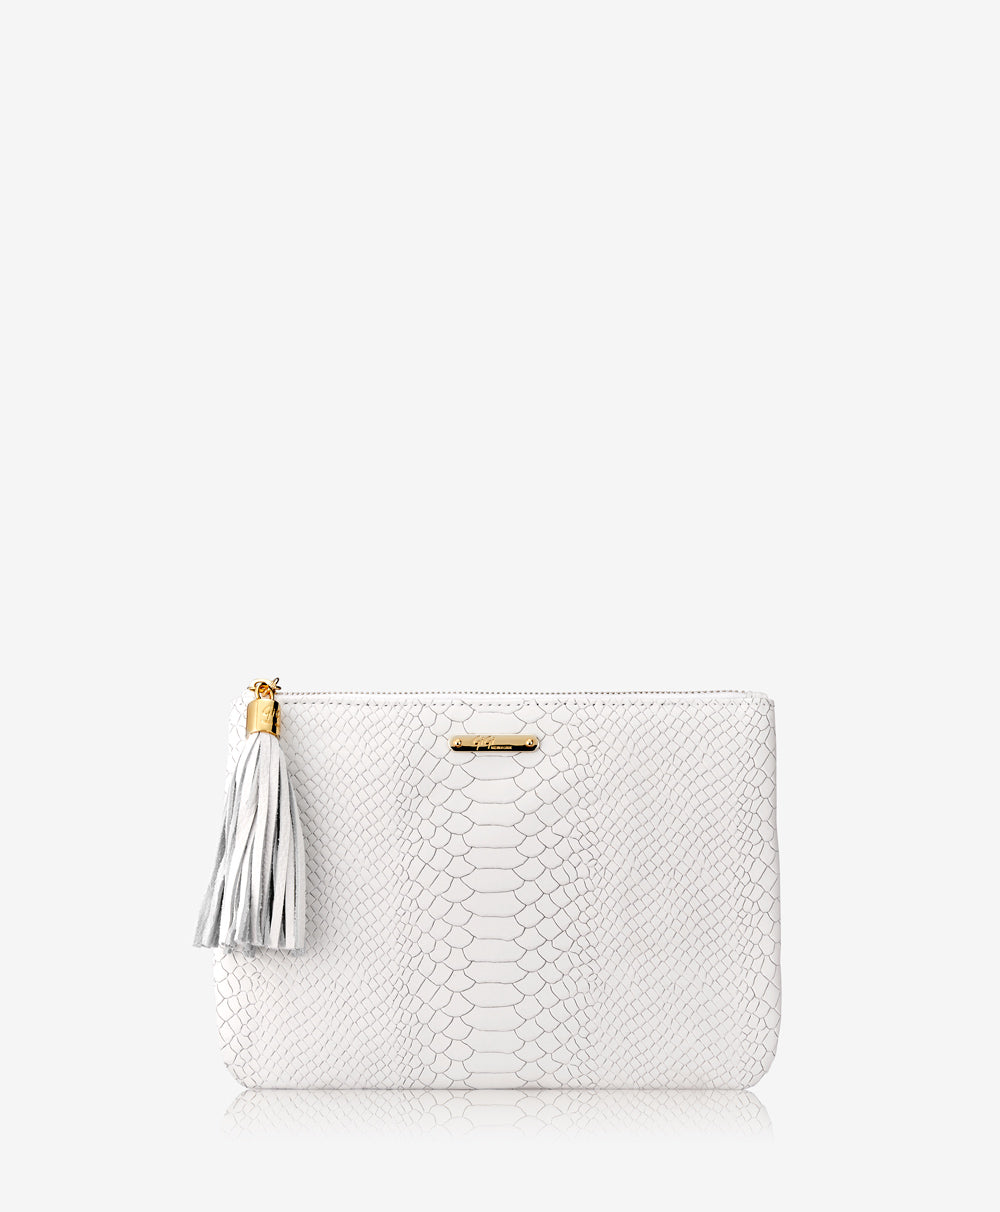 GiGi New York All In One Clutch Bag White Embossed Python Leather